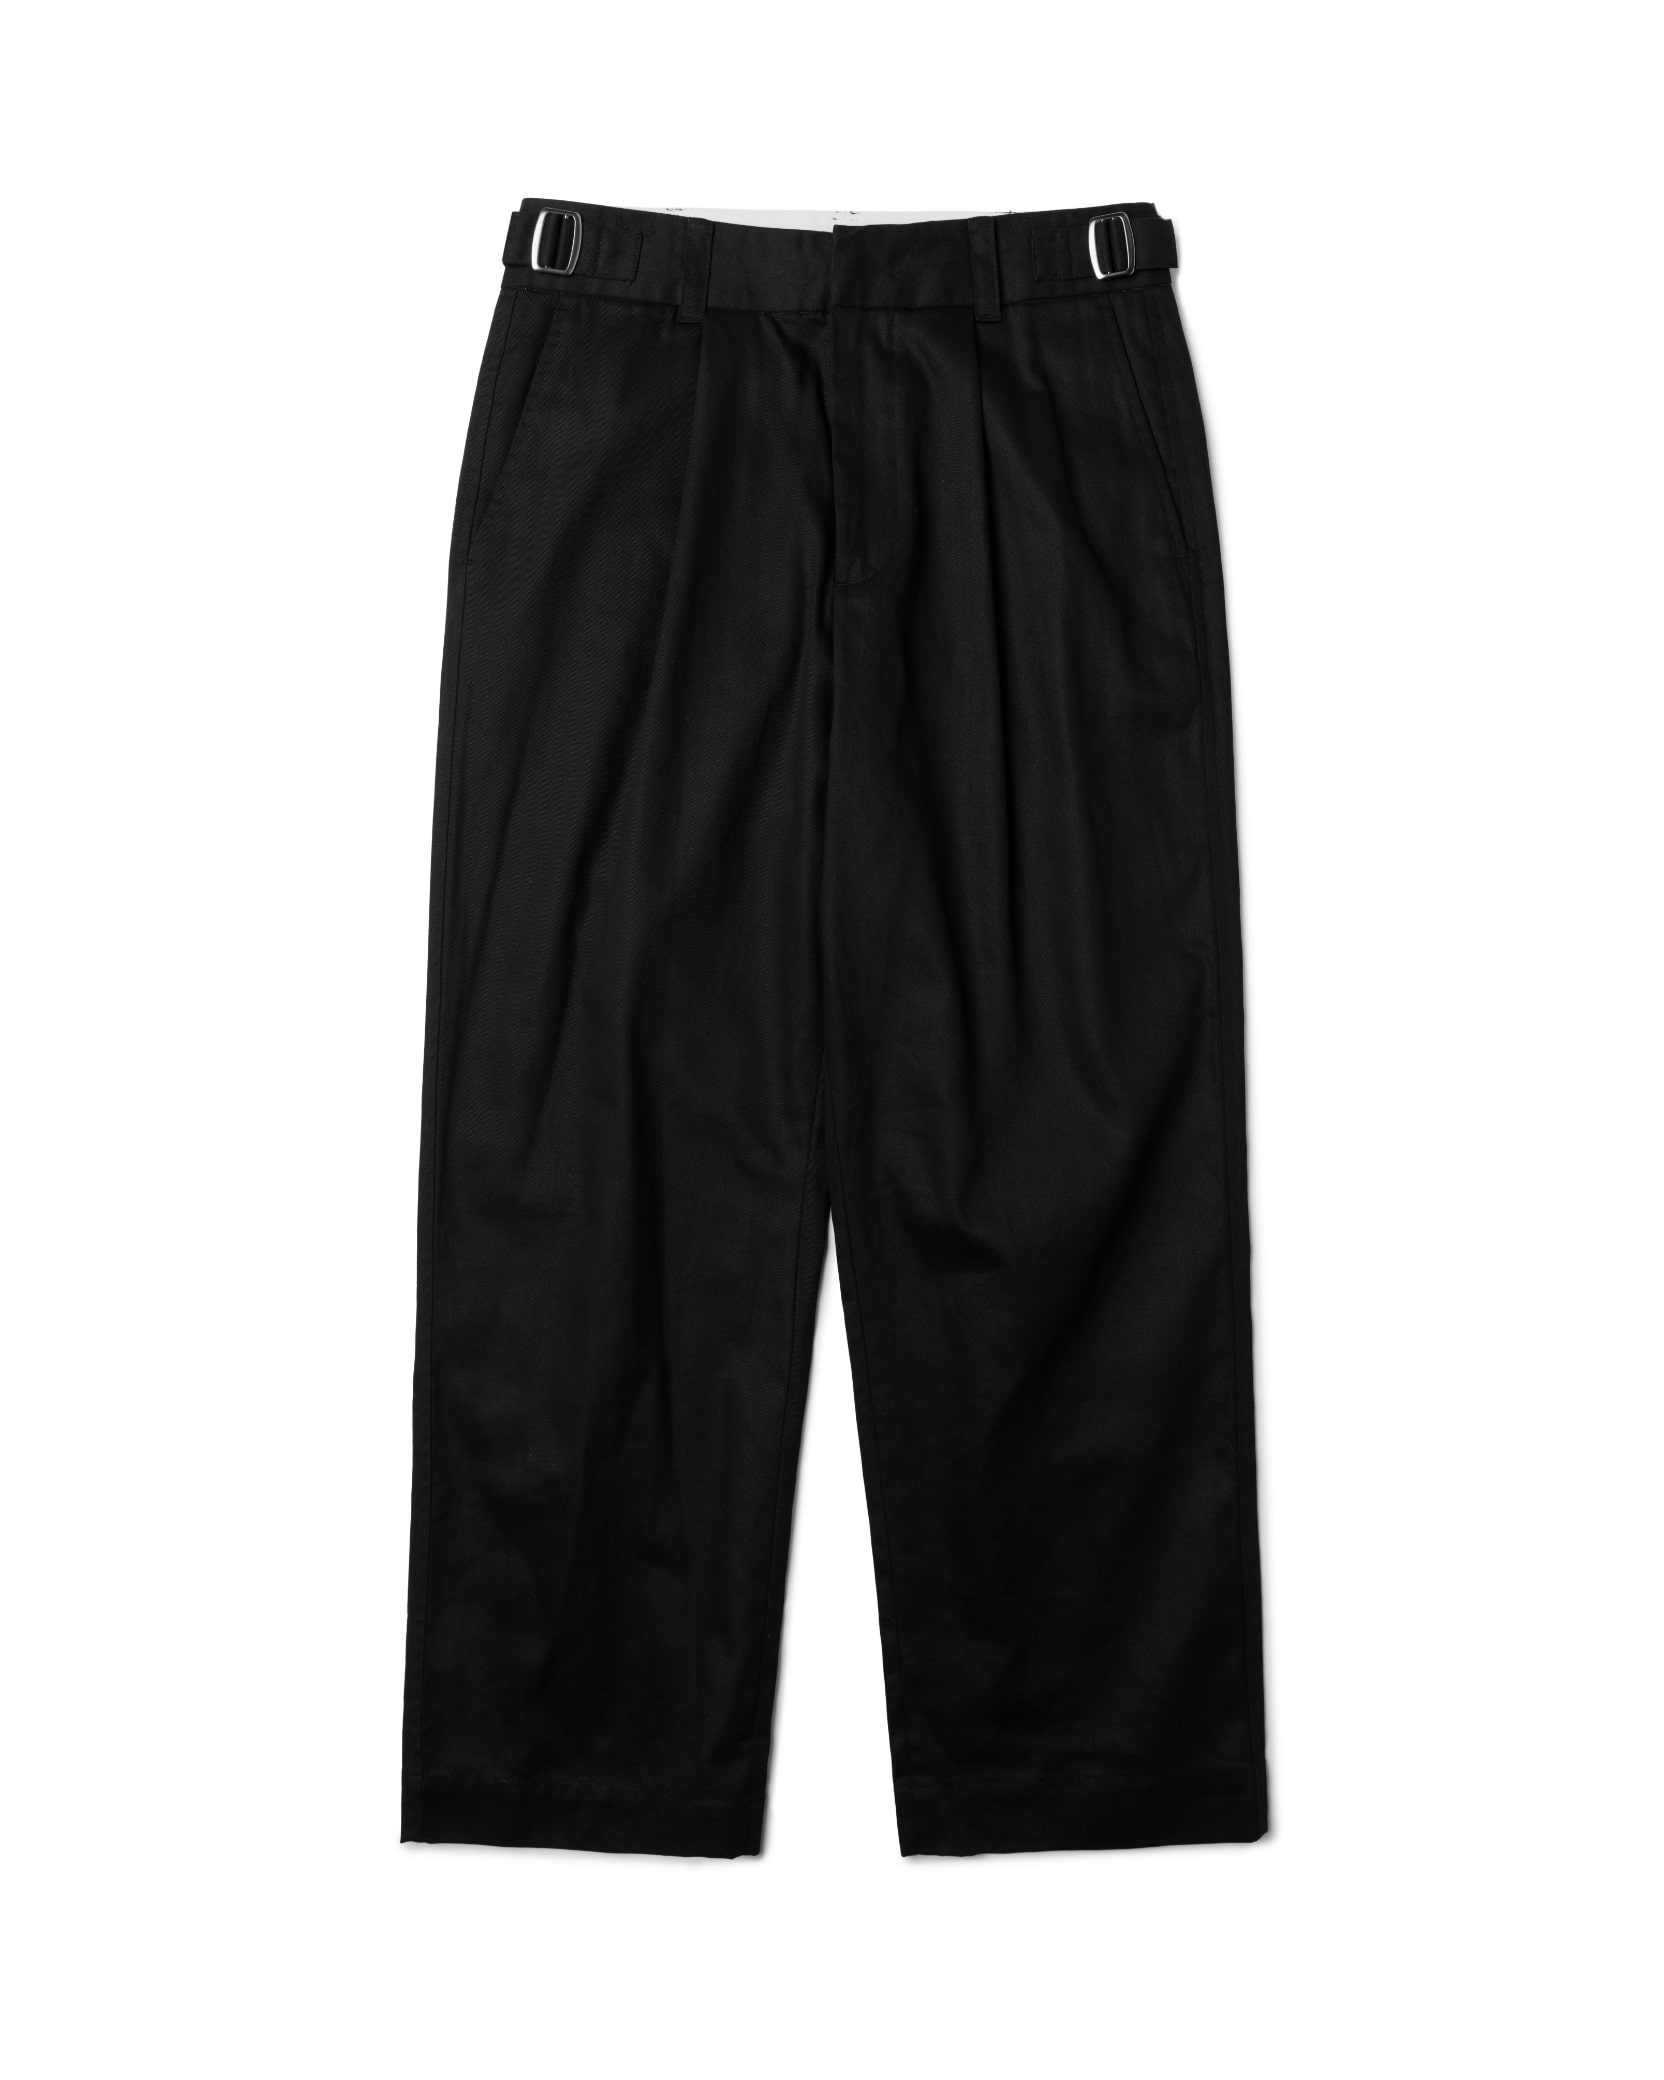 COTTON ONE TUCK TROUSERS - BLACK